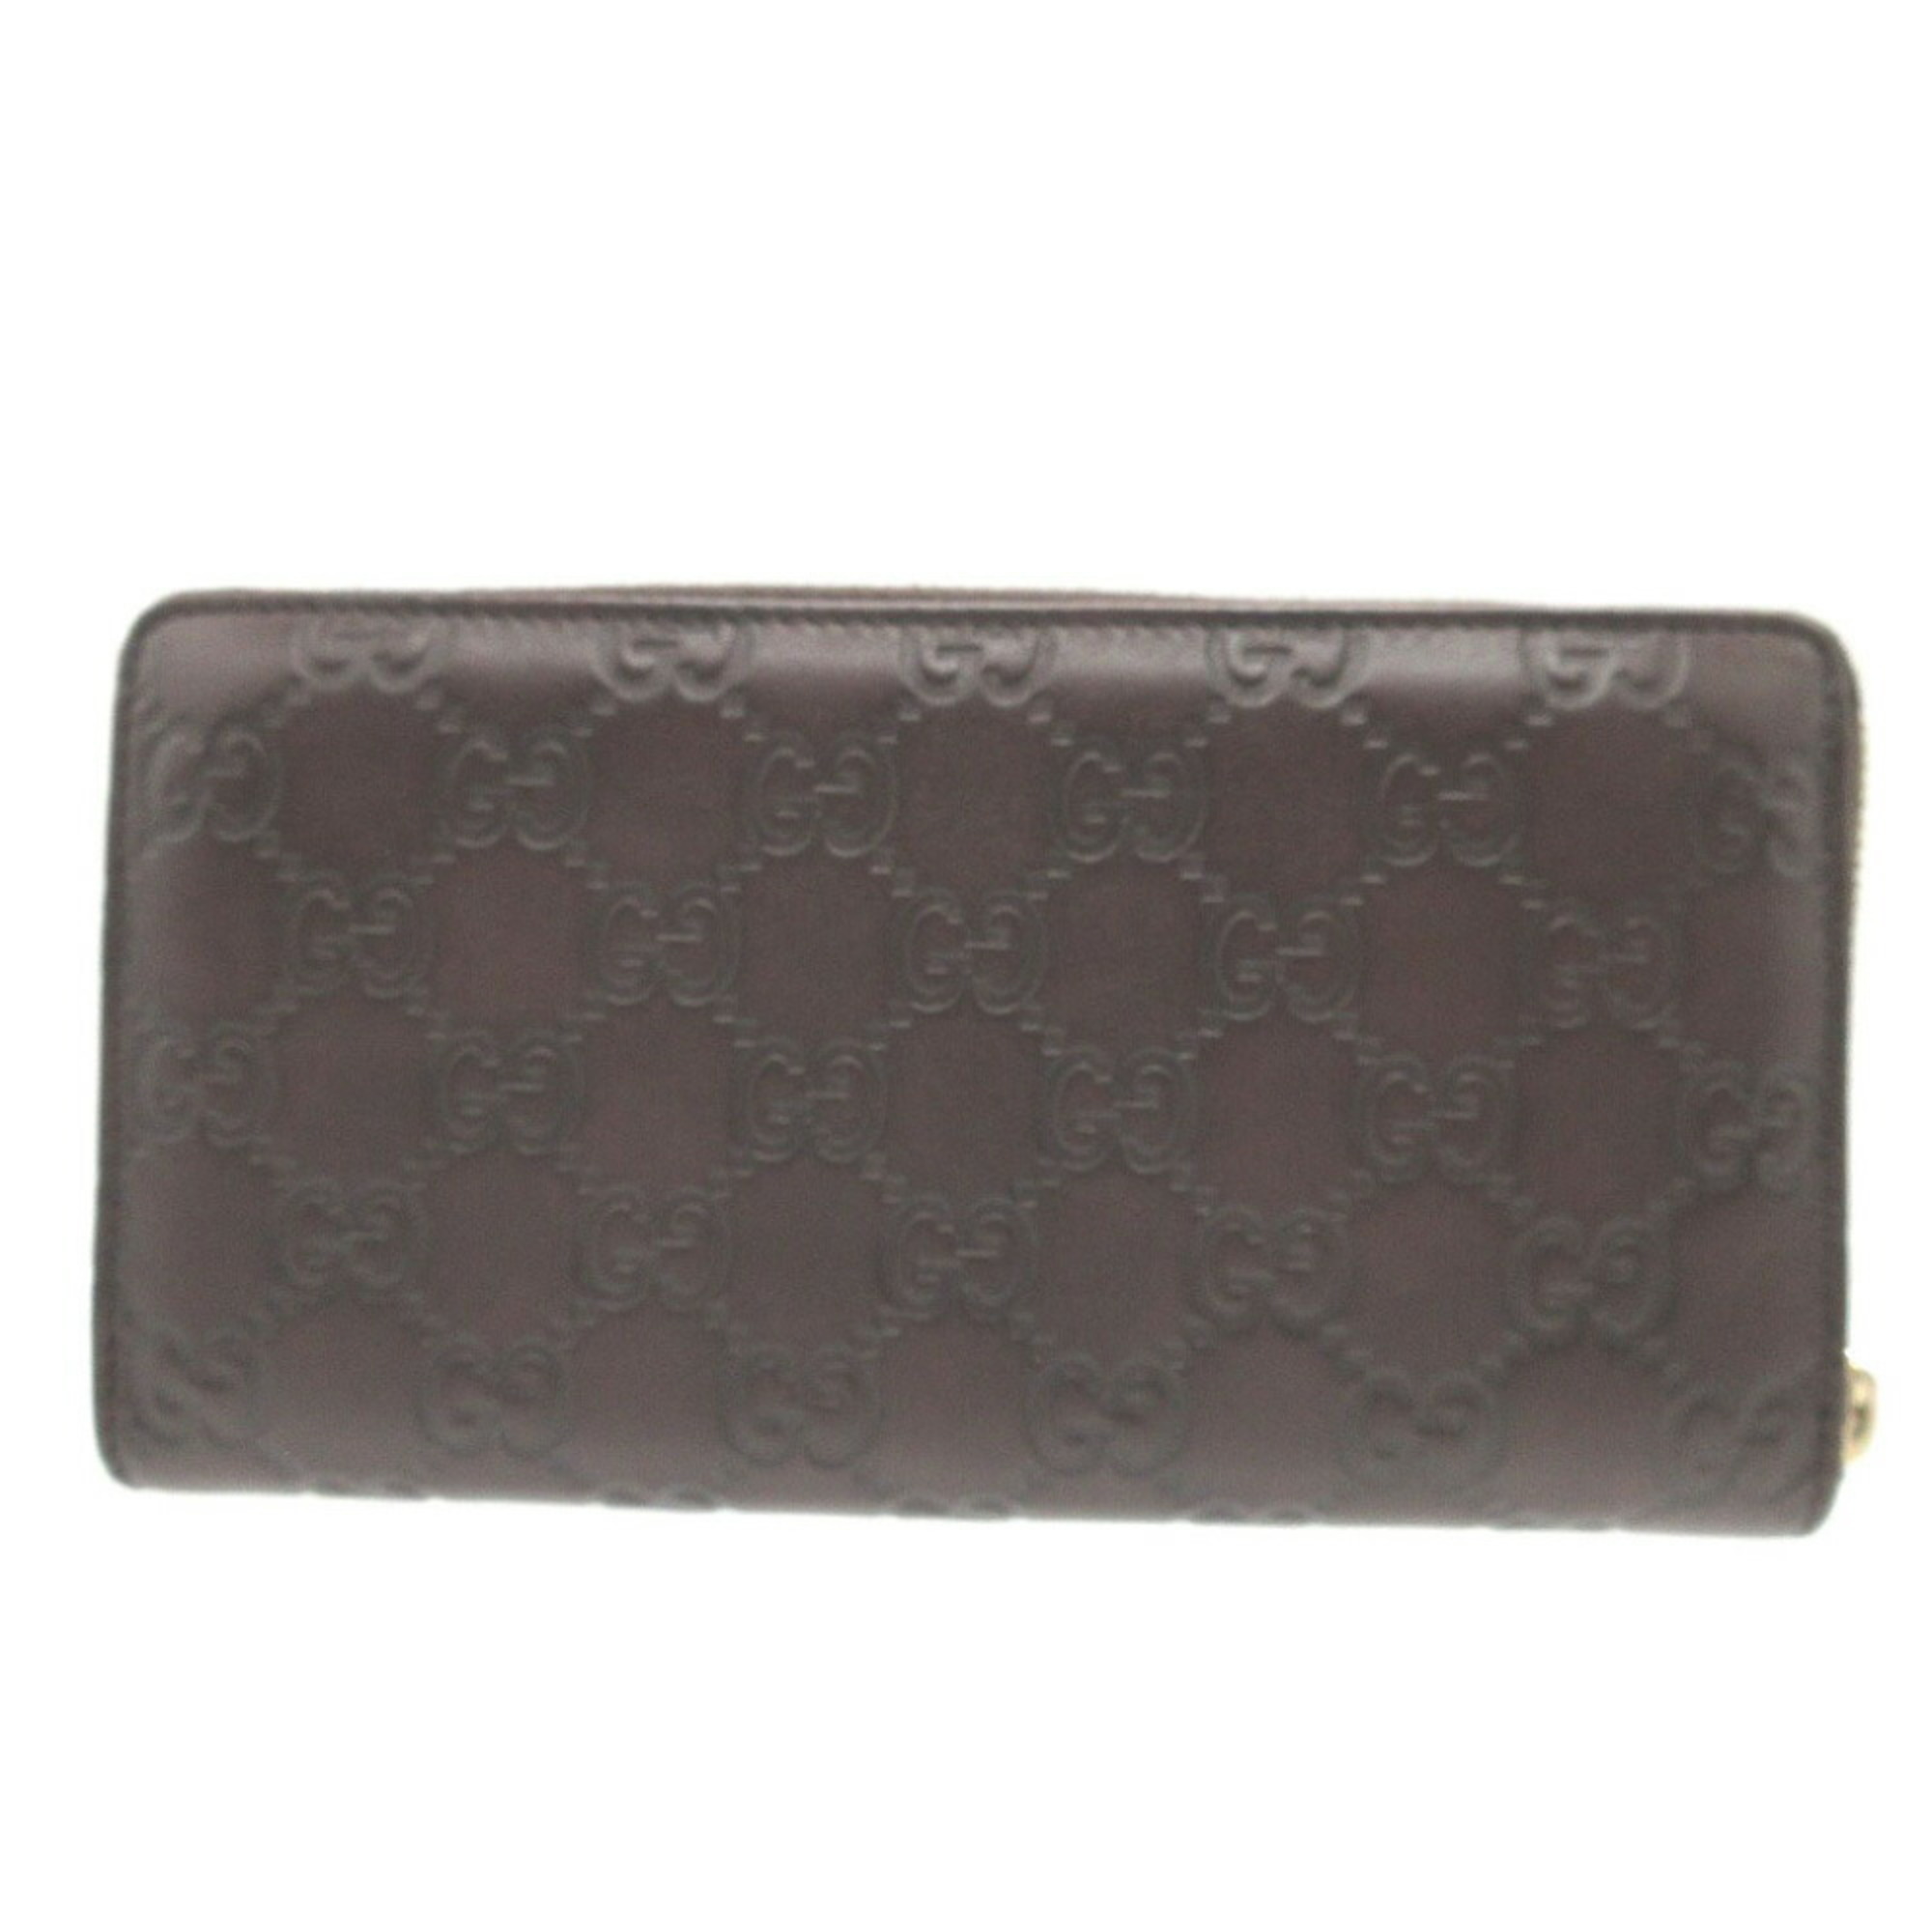 Gucci Guccissima 112724 Leather Brown Round Long Wallet 1442GUCCI